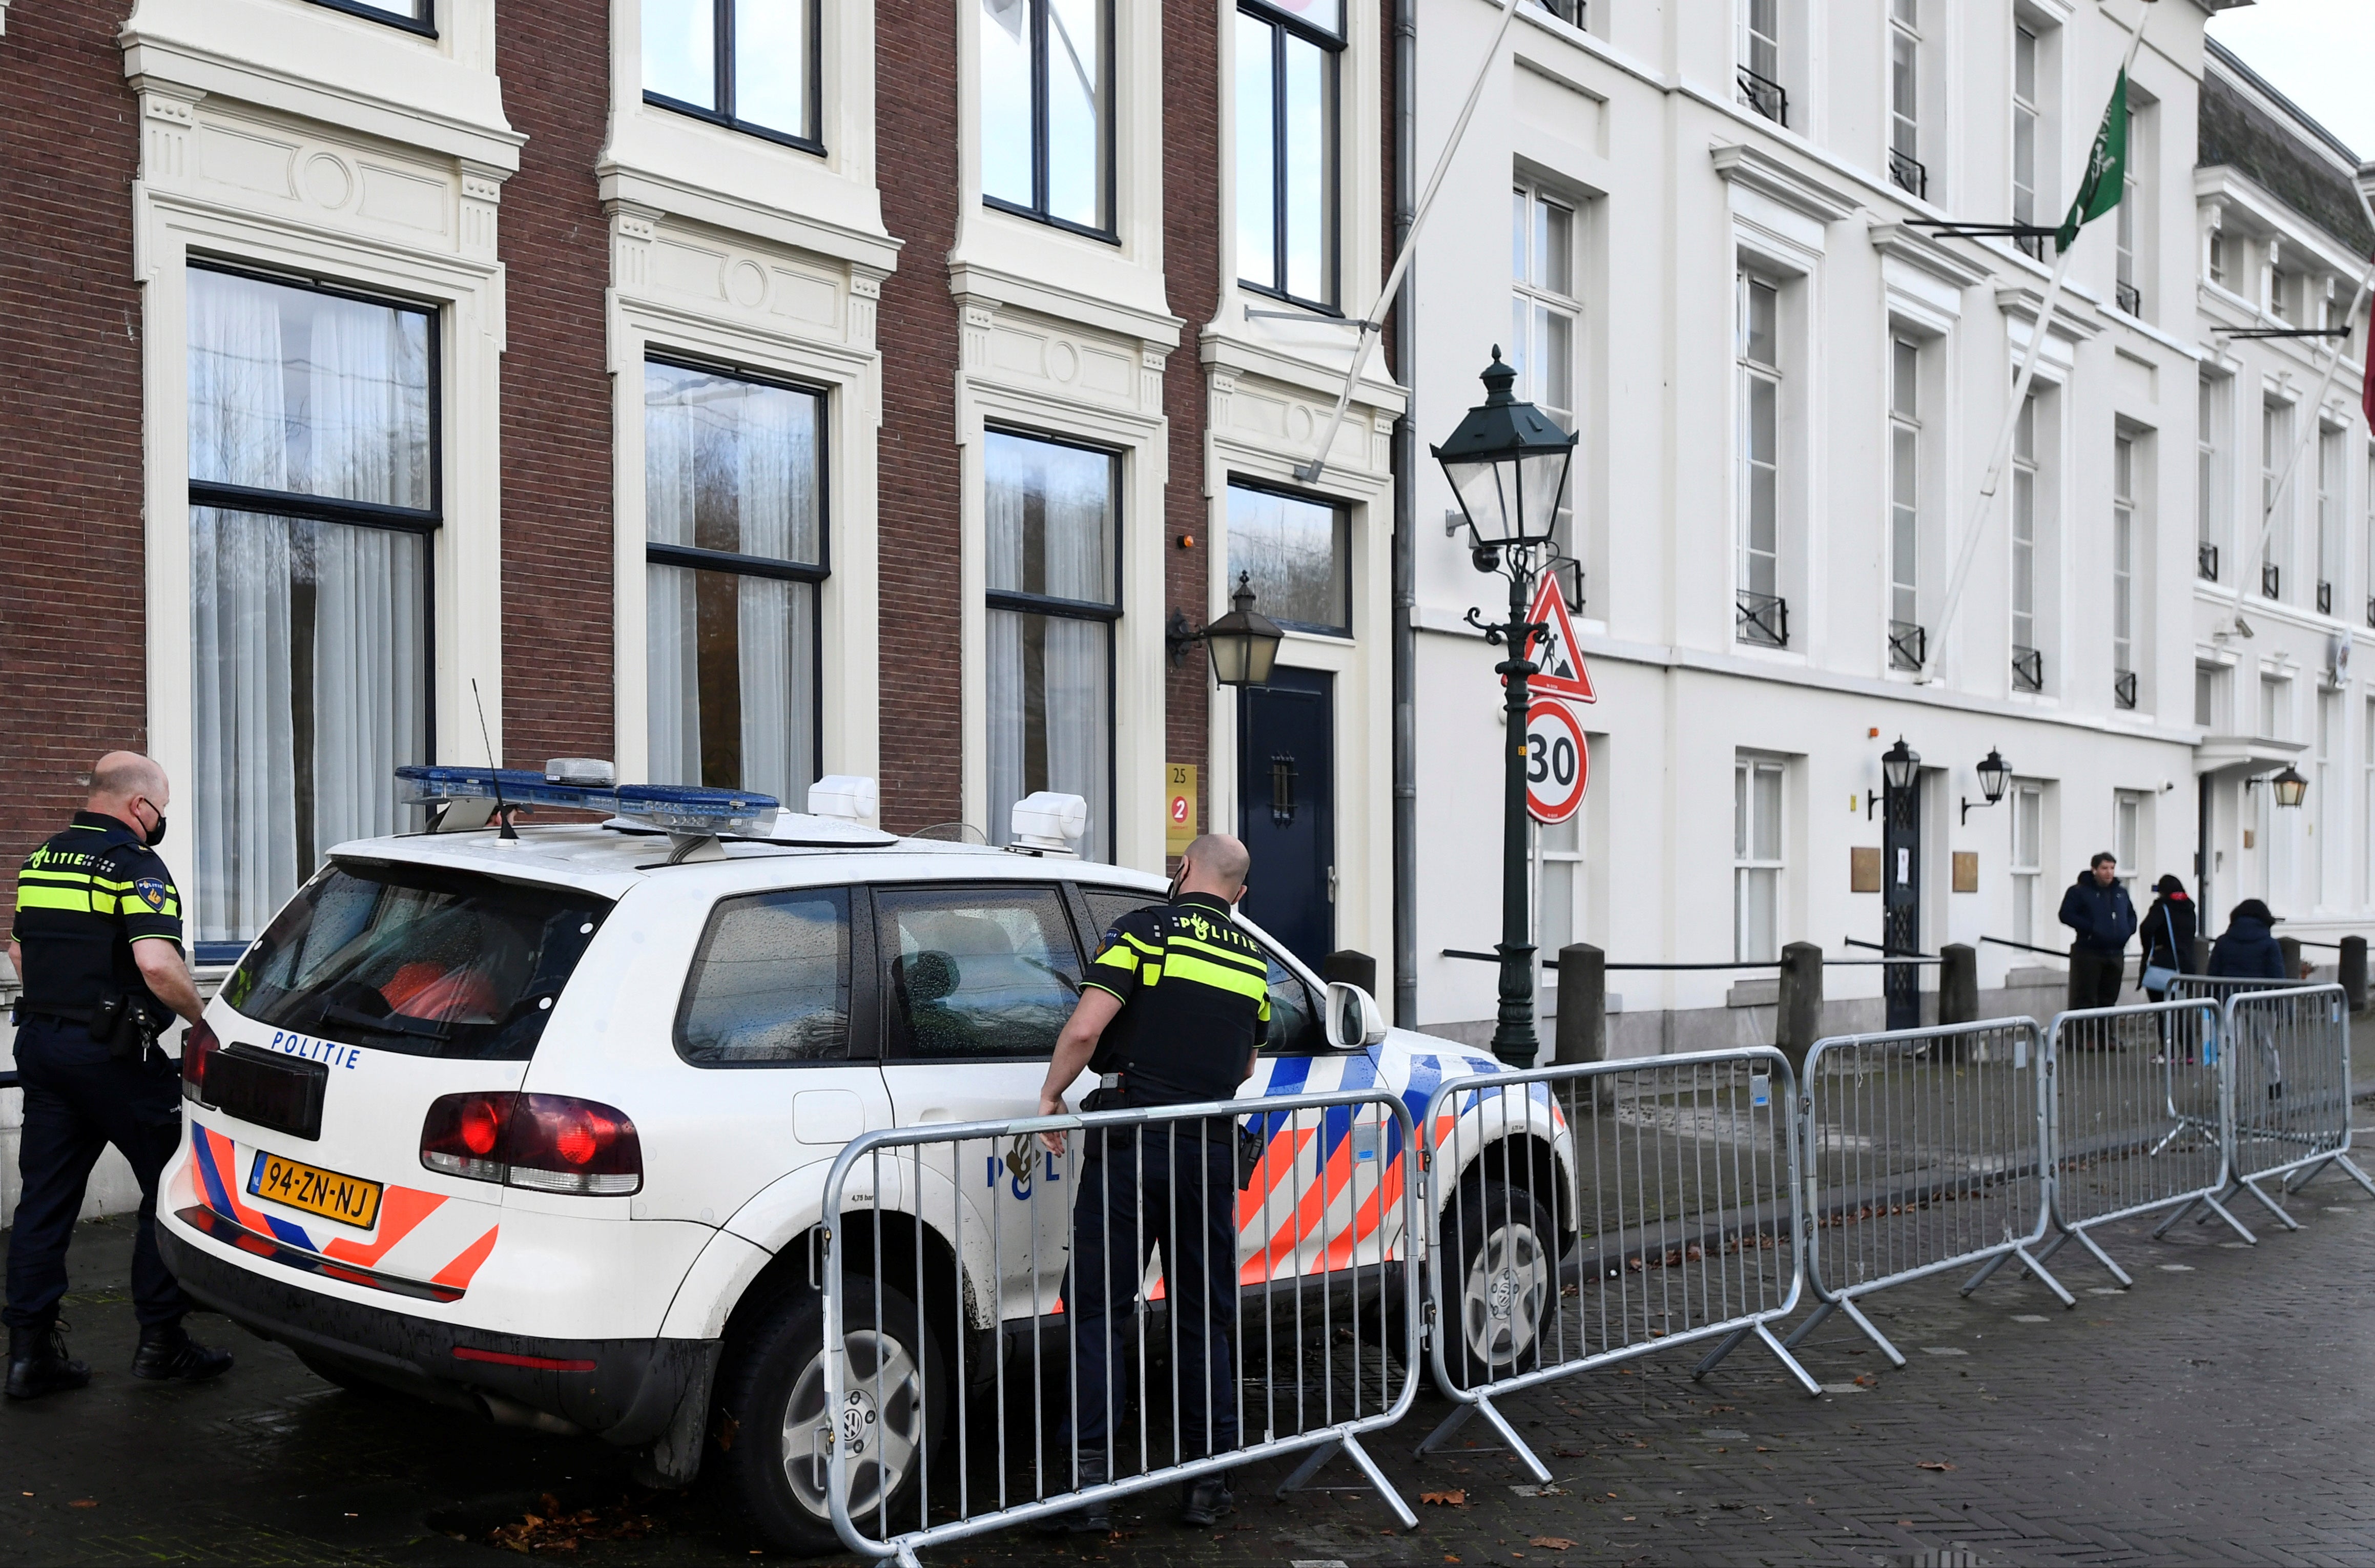 Police officers stand near the Embassy of Saudi Arabia after unidentified assailants sprayed it with gunfire, in The Hague, Netherlands